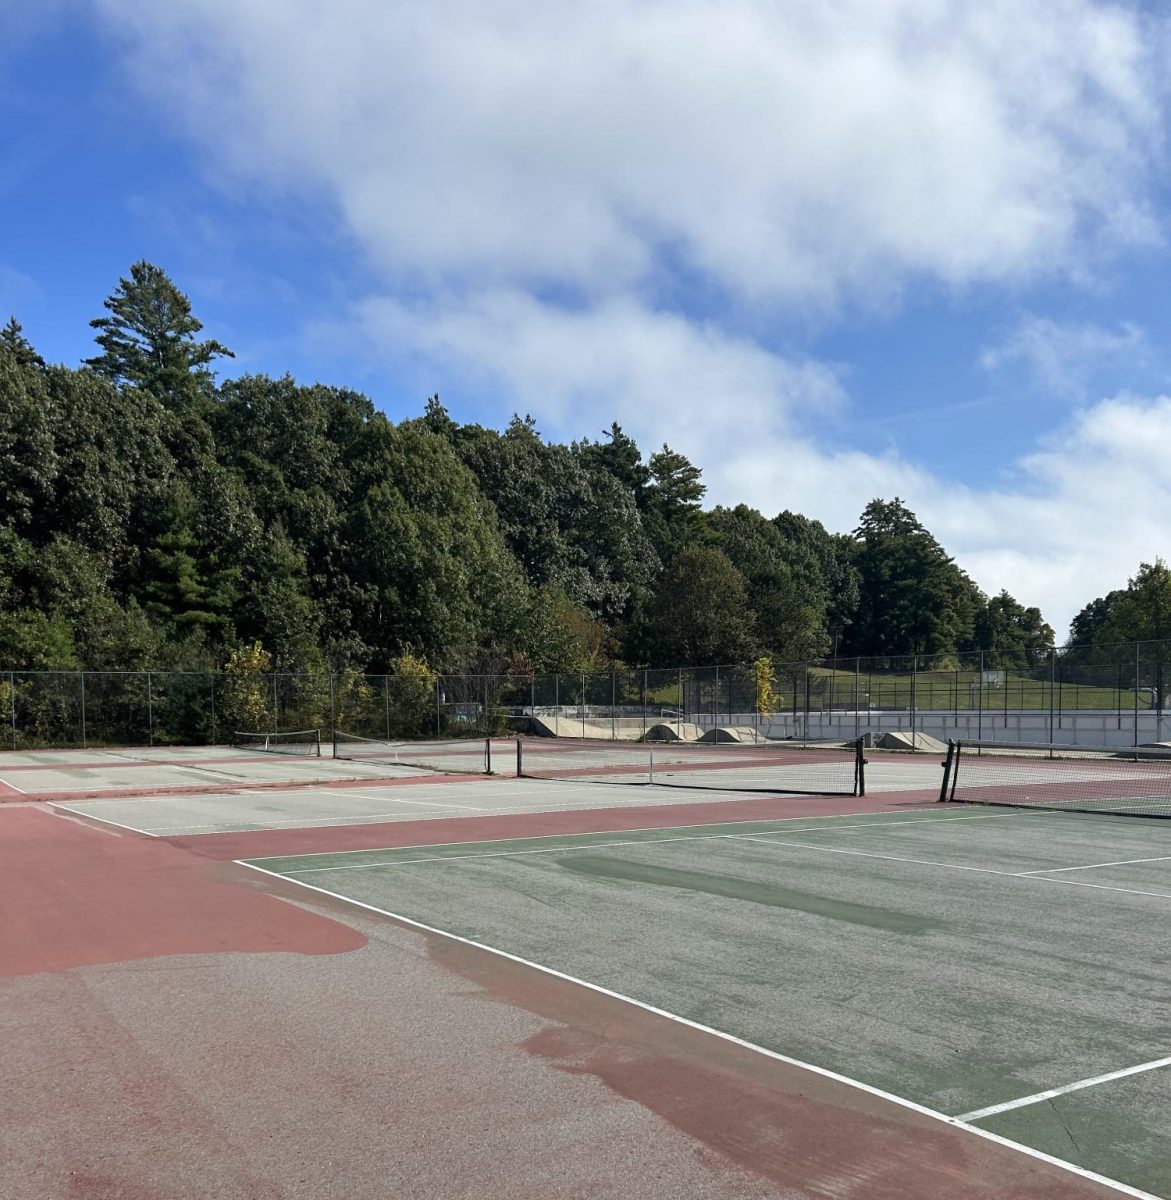 SHS+tennis+courts+are+used+by+students+and+staff+who+enjoy+playing+pickleball